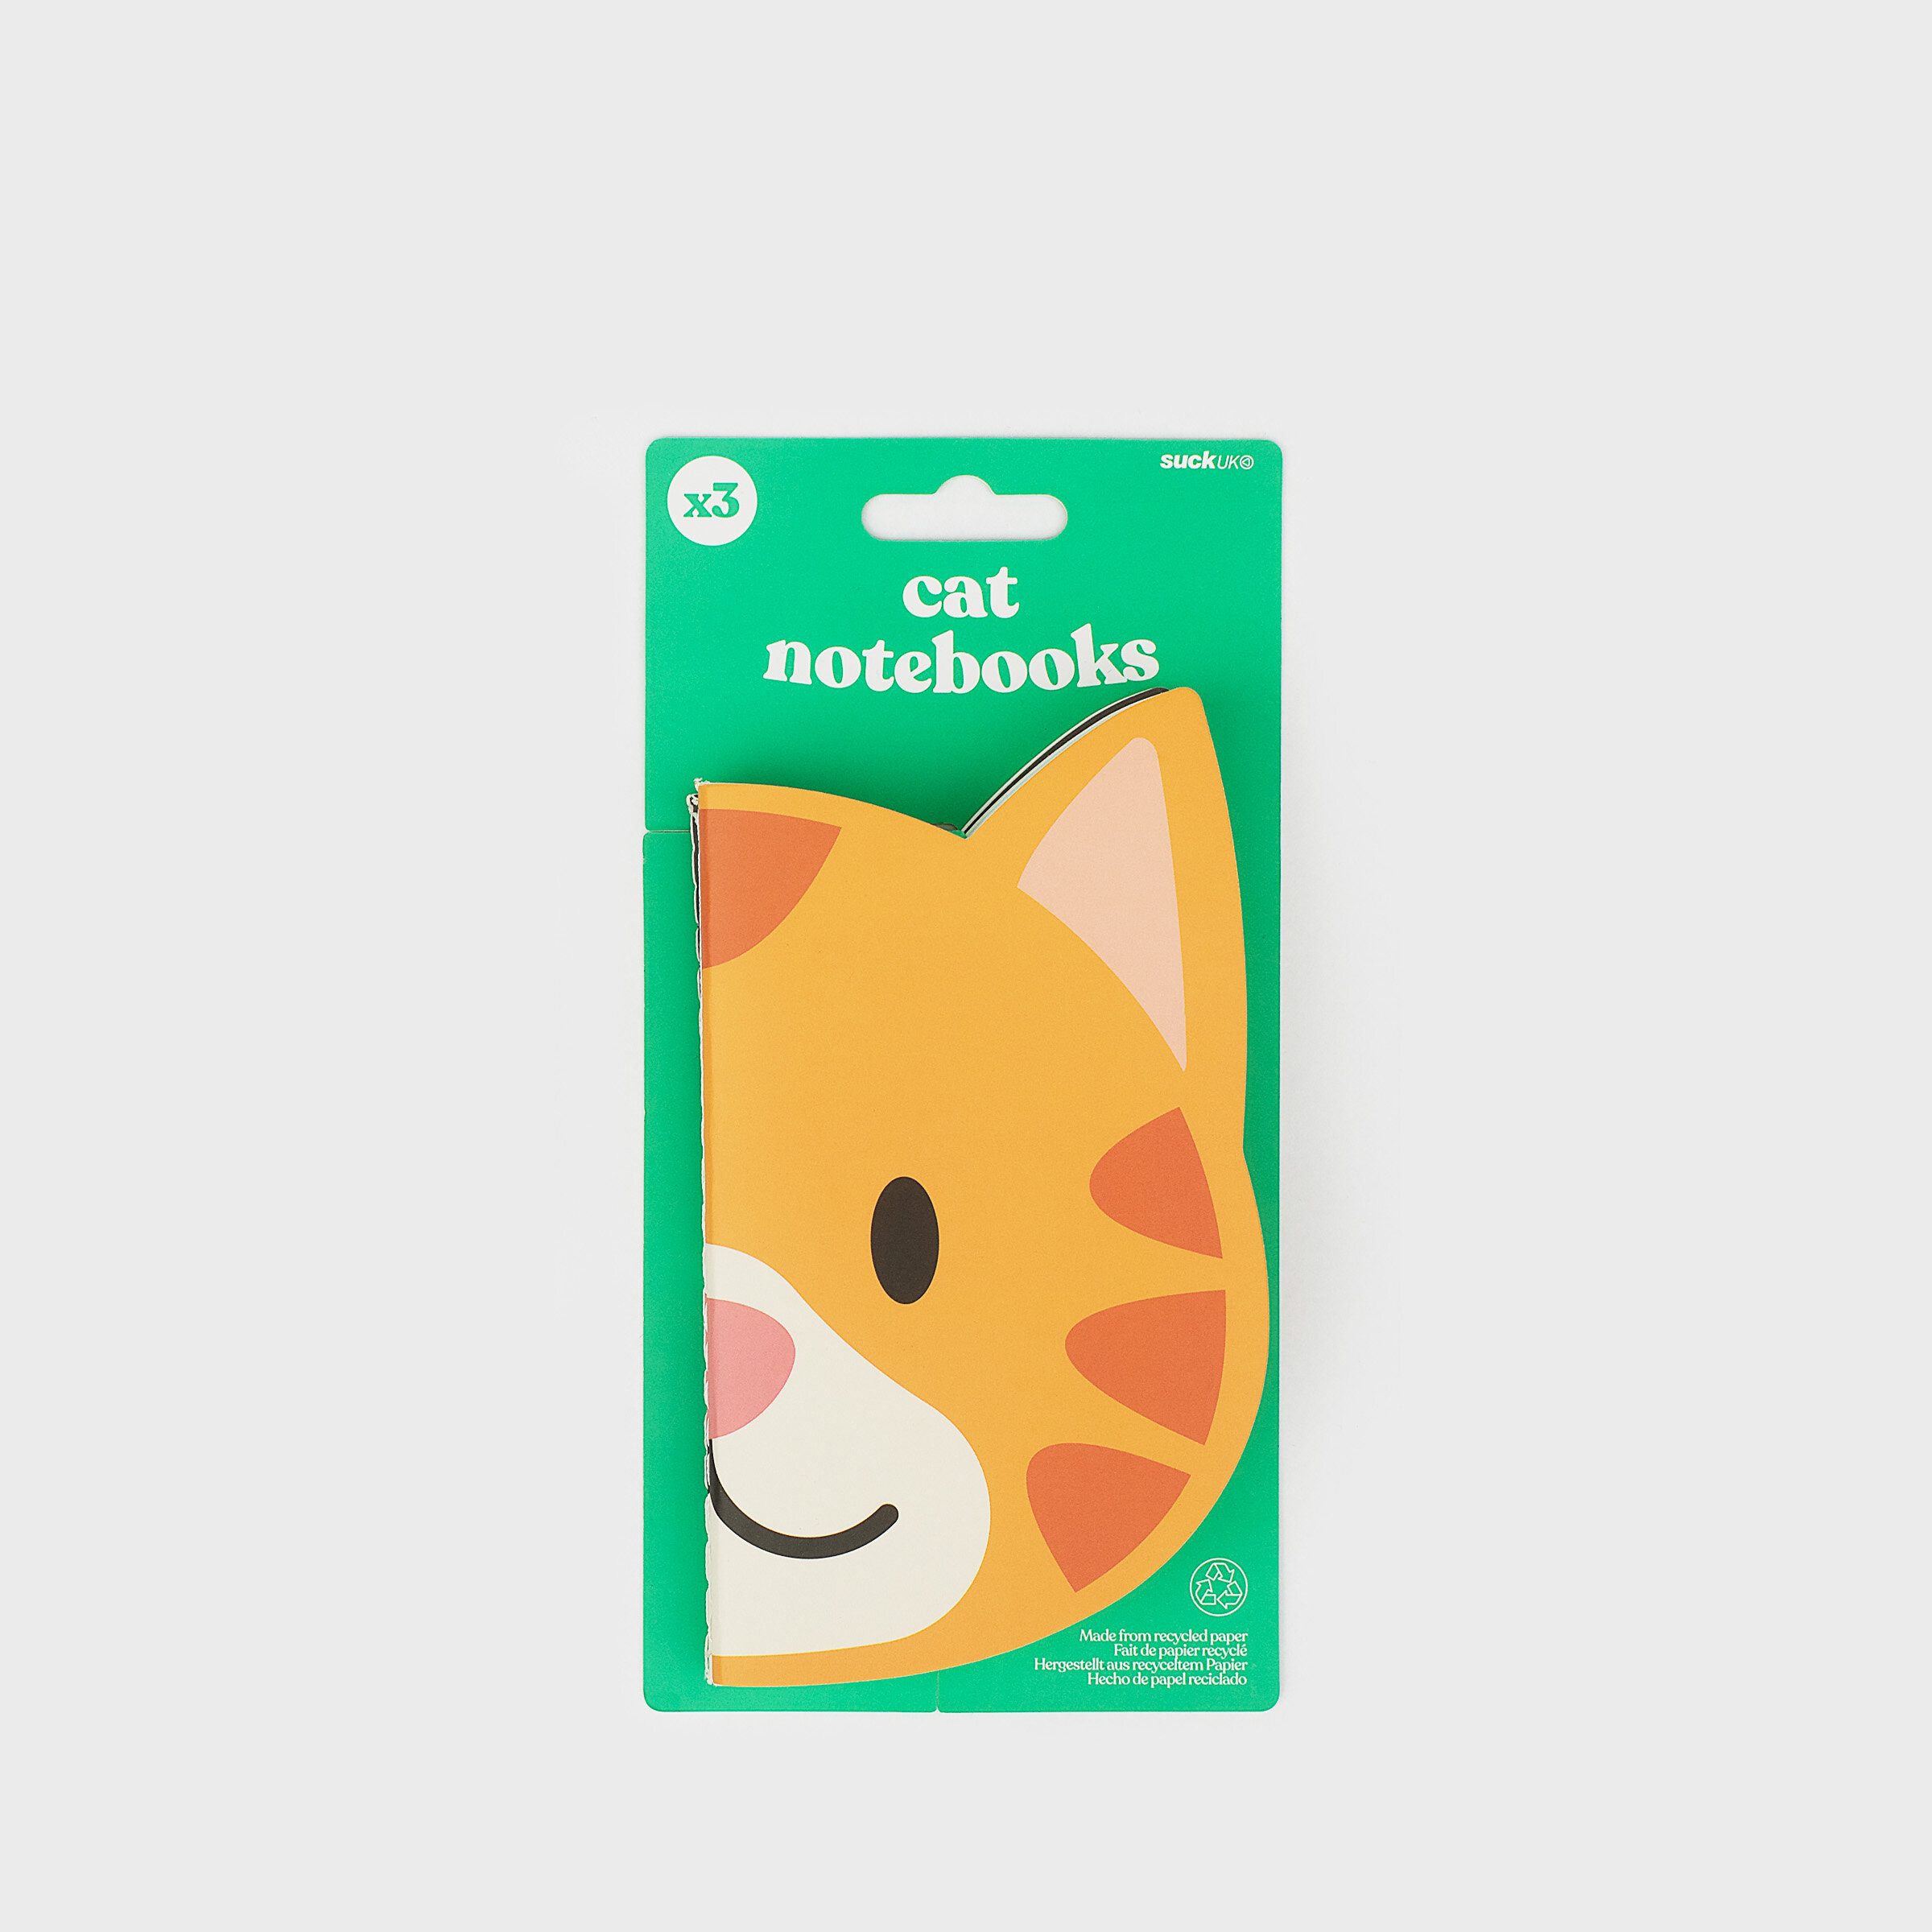 Pack of Cat Notebooks